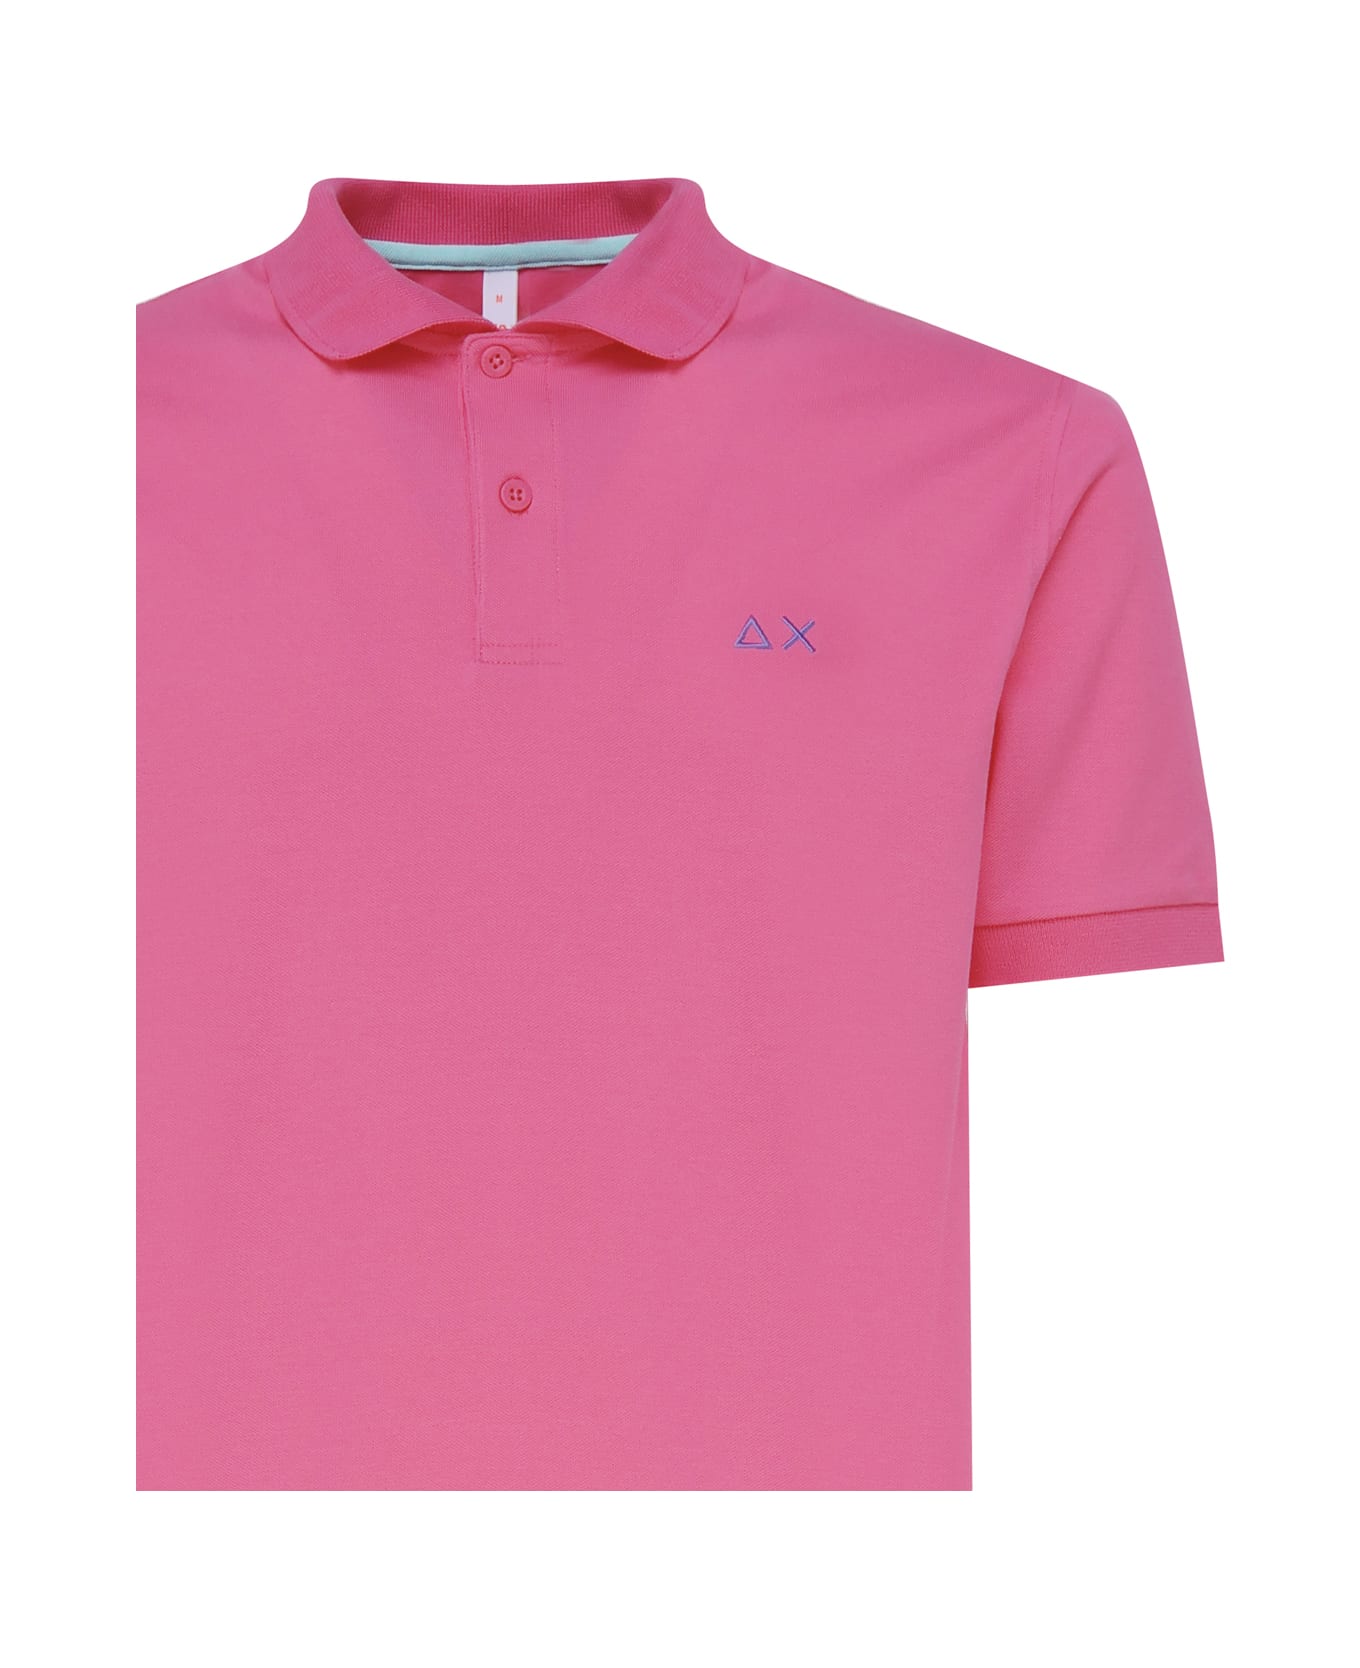 Sun 68 Polo T-shirt In Cotton - Pink